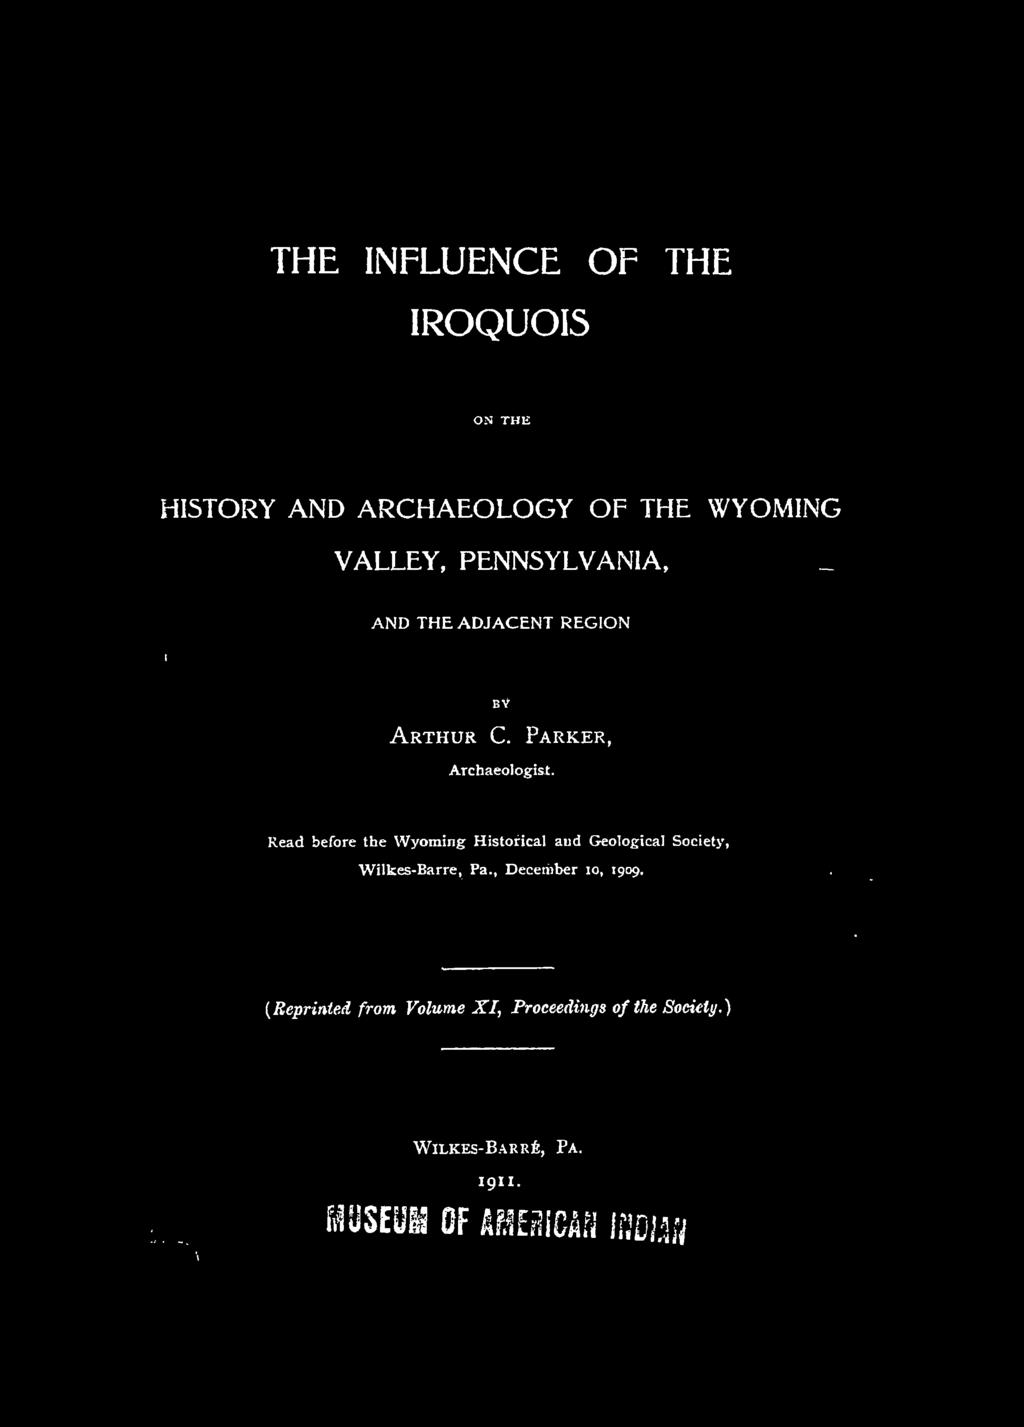 THE INFLUENCE IROQUOIS OF THE HISTORY AND ARCHAEOLOGY OF THE WYOMING VALLEY, PENNSYLVANIA, AND THE ADJACENT REGION bv Arthur C. Parker, Archaeologist.